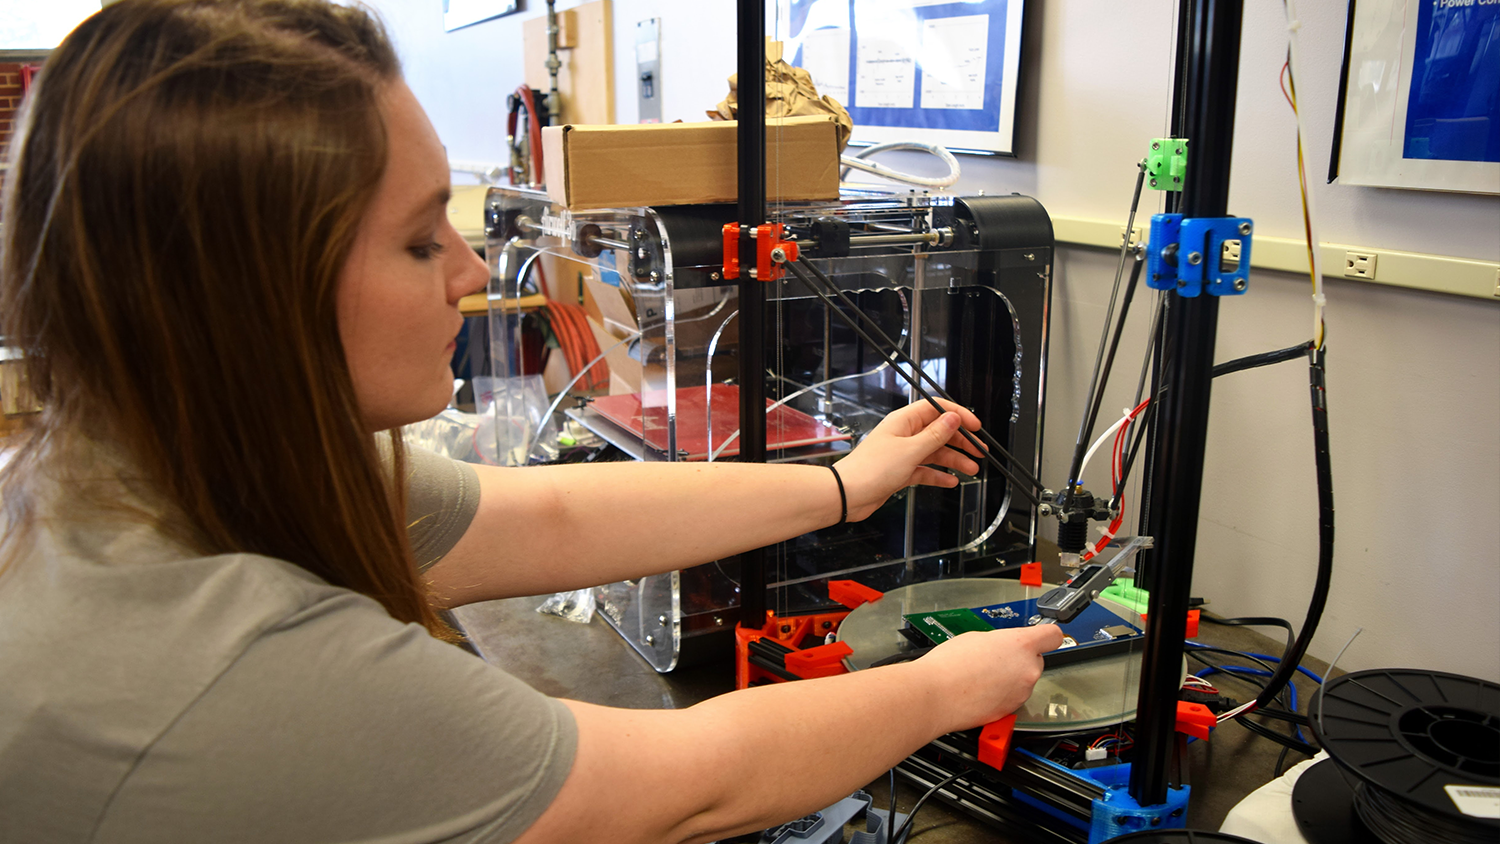 SMT student with 3-D printer